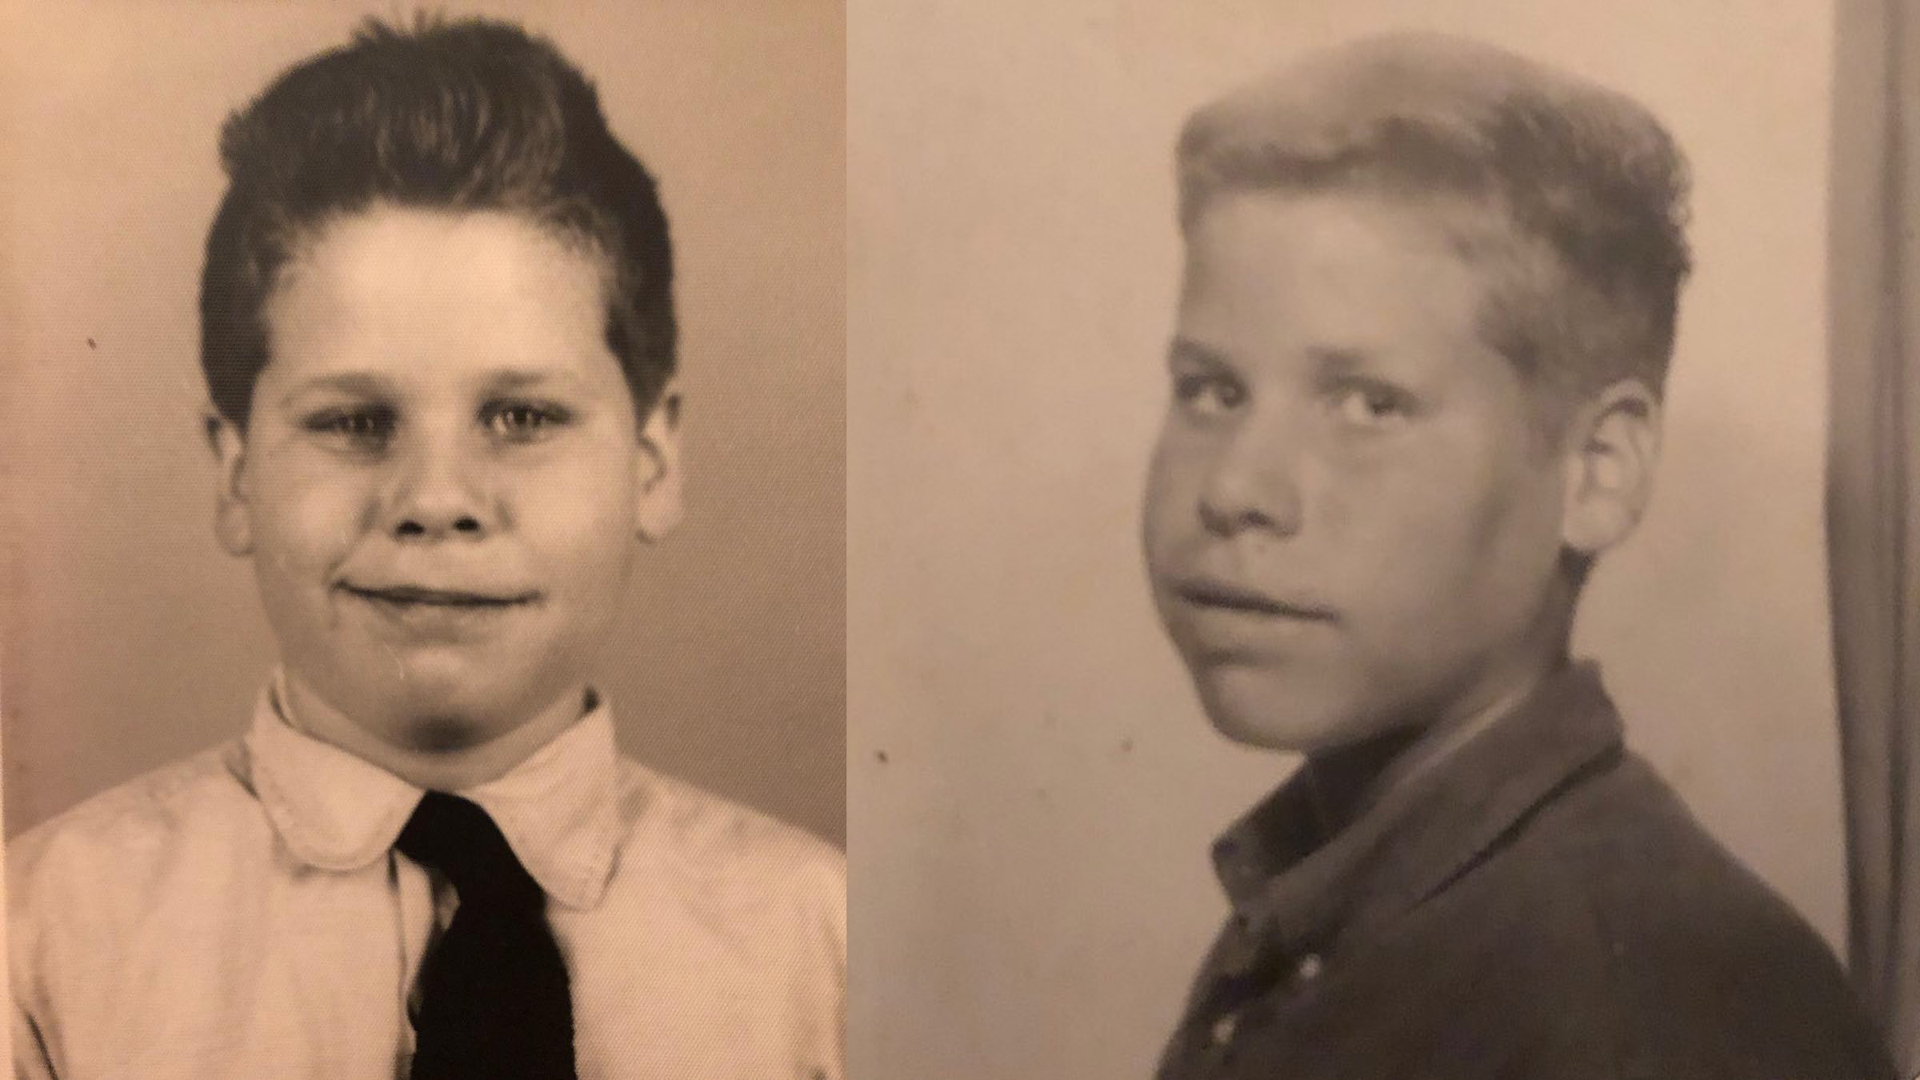 Ron Perlman in childhood